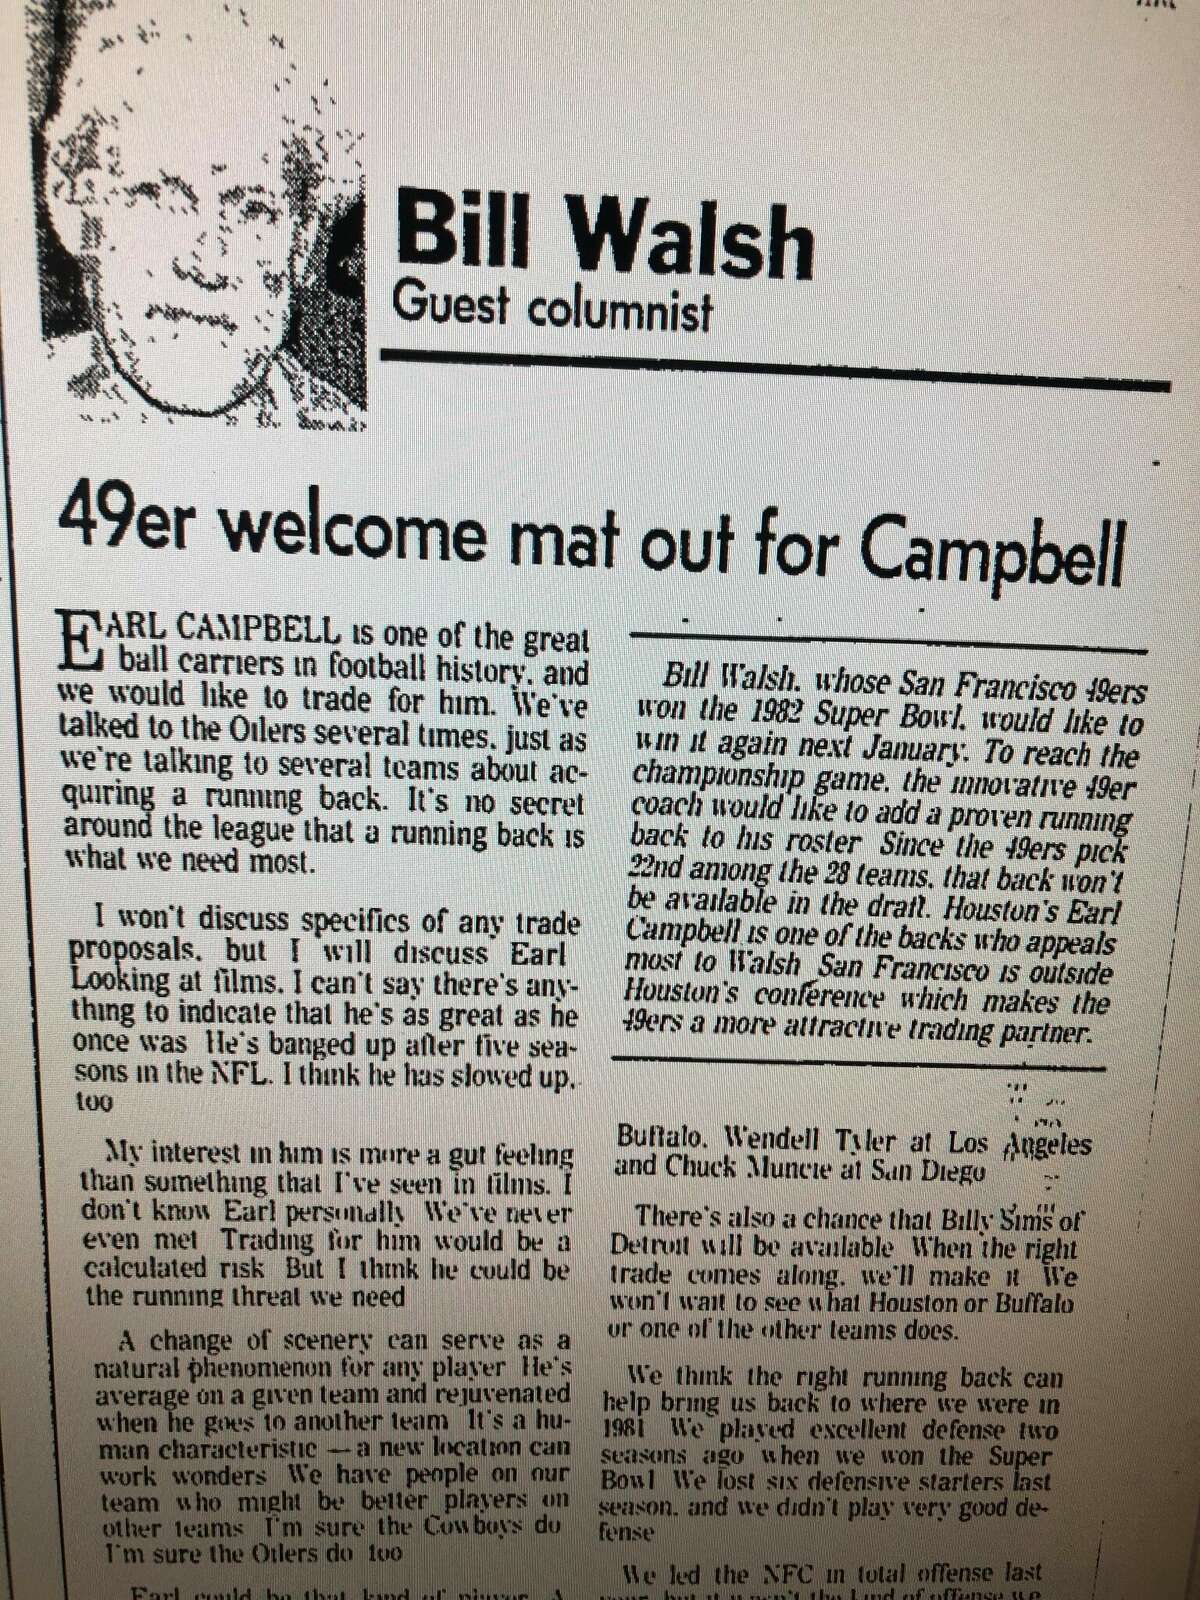 Bill Walsh wrote a guest column for the Chronicle in 1983 about a proposed trade of Earl Campbell to San Francisco.